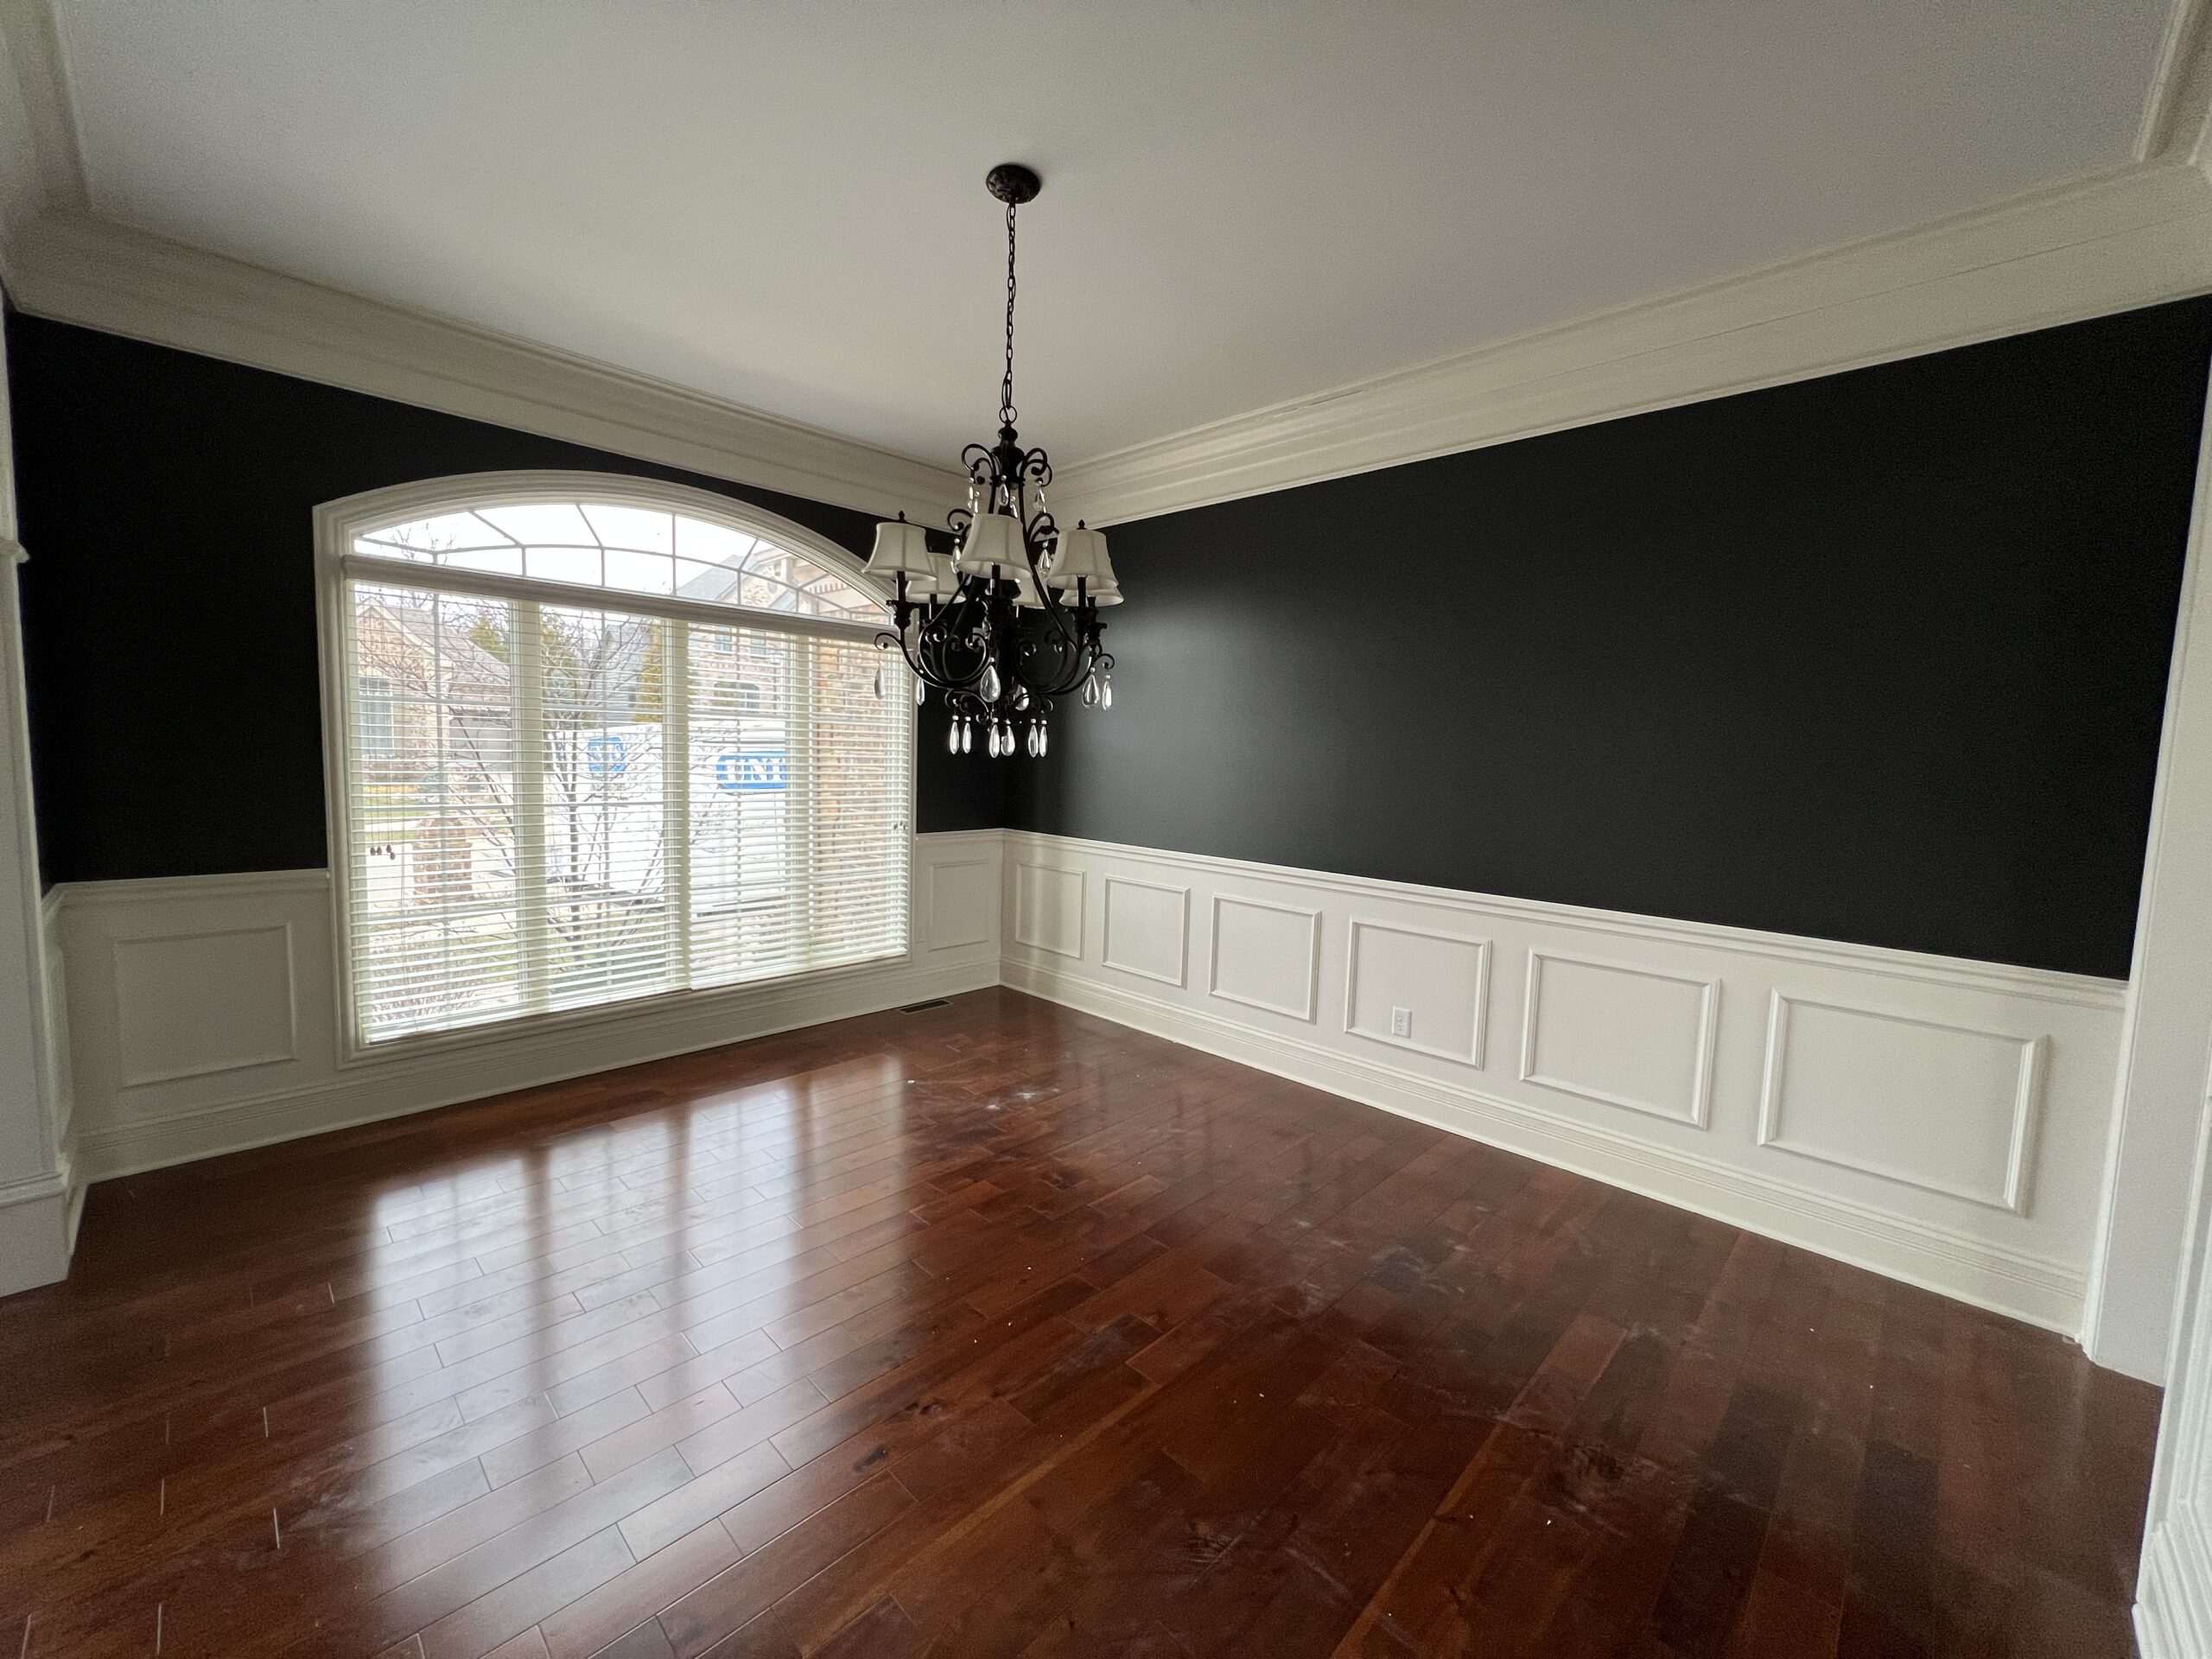 This is a dining room painted tricorn black from an older yellow color.